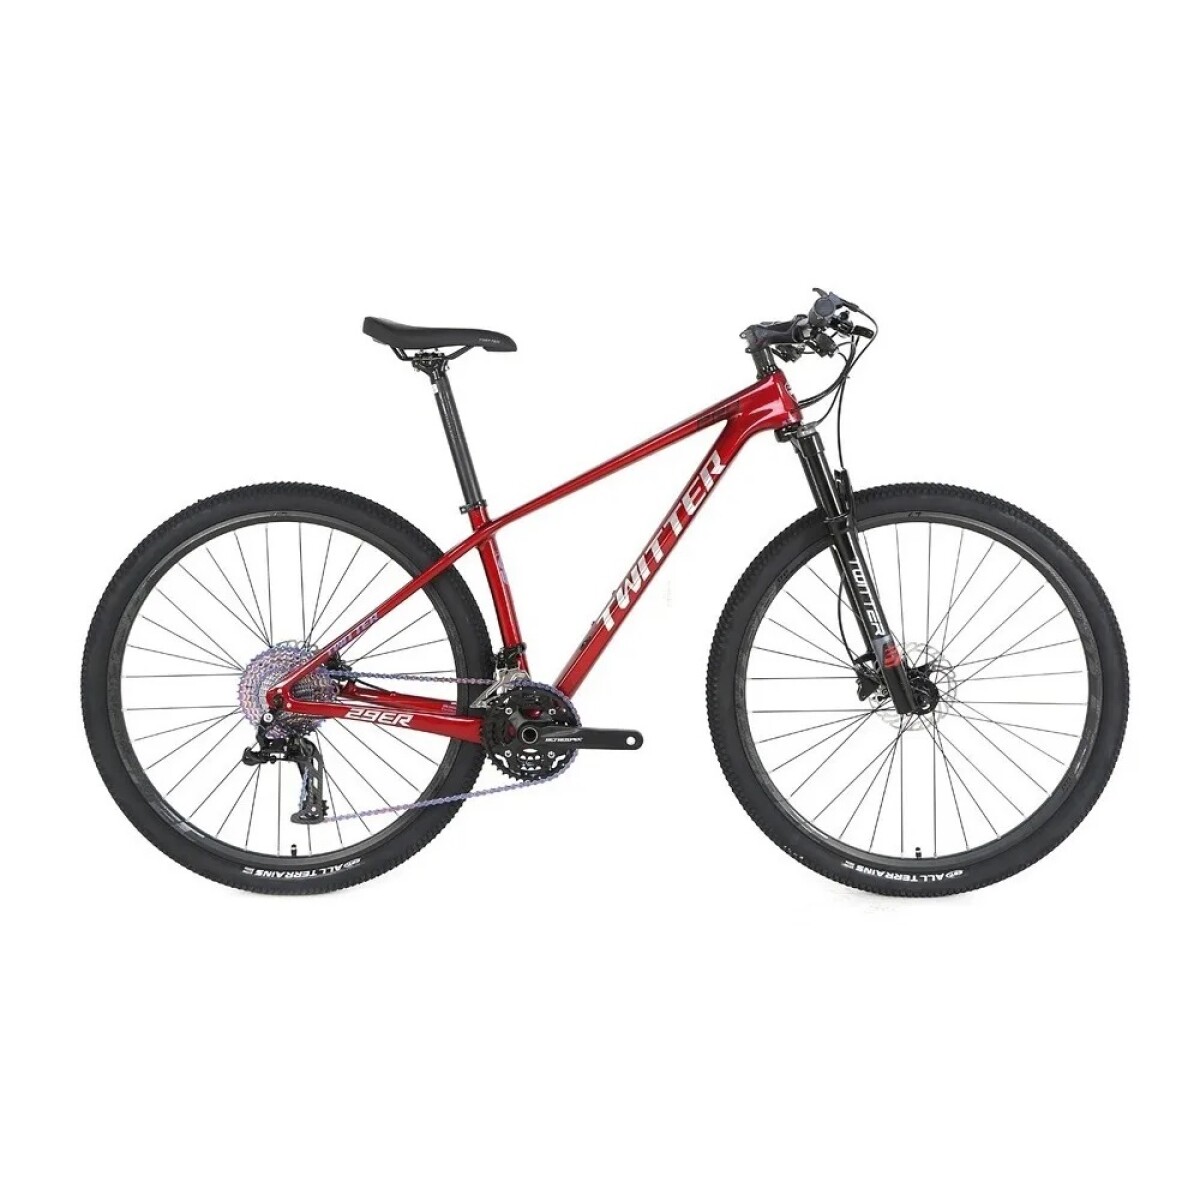 Bicicleta Twitter Leopard-rs 12s*2/r-29/t17 Holo Rd 